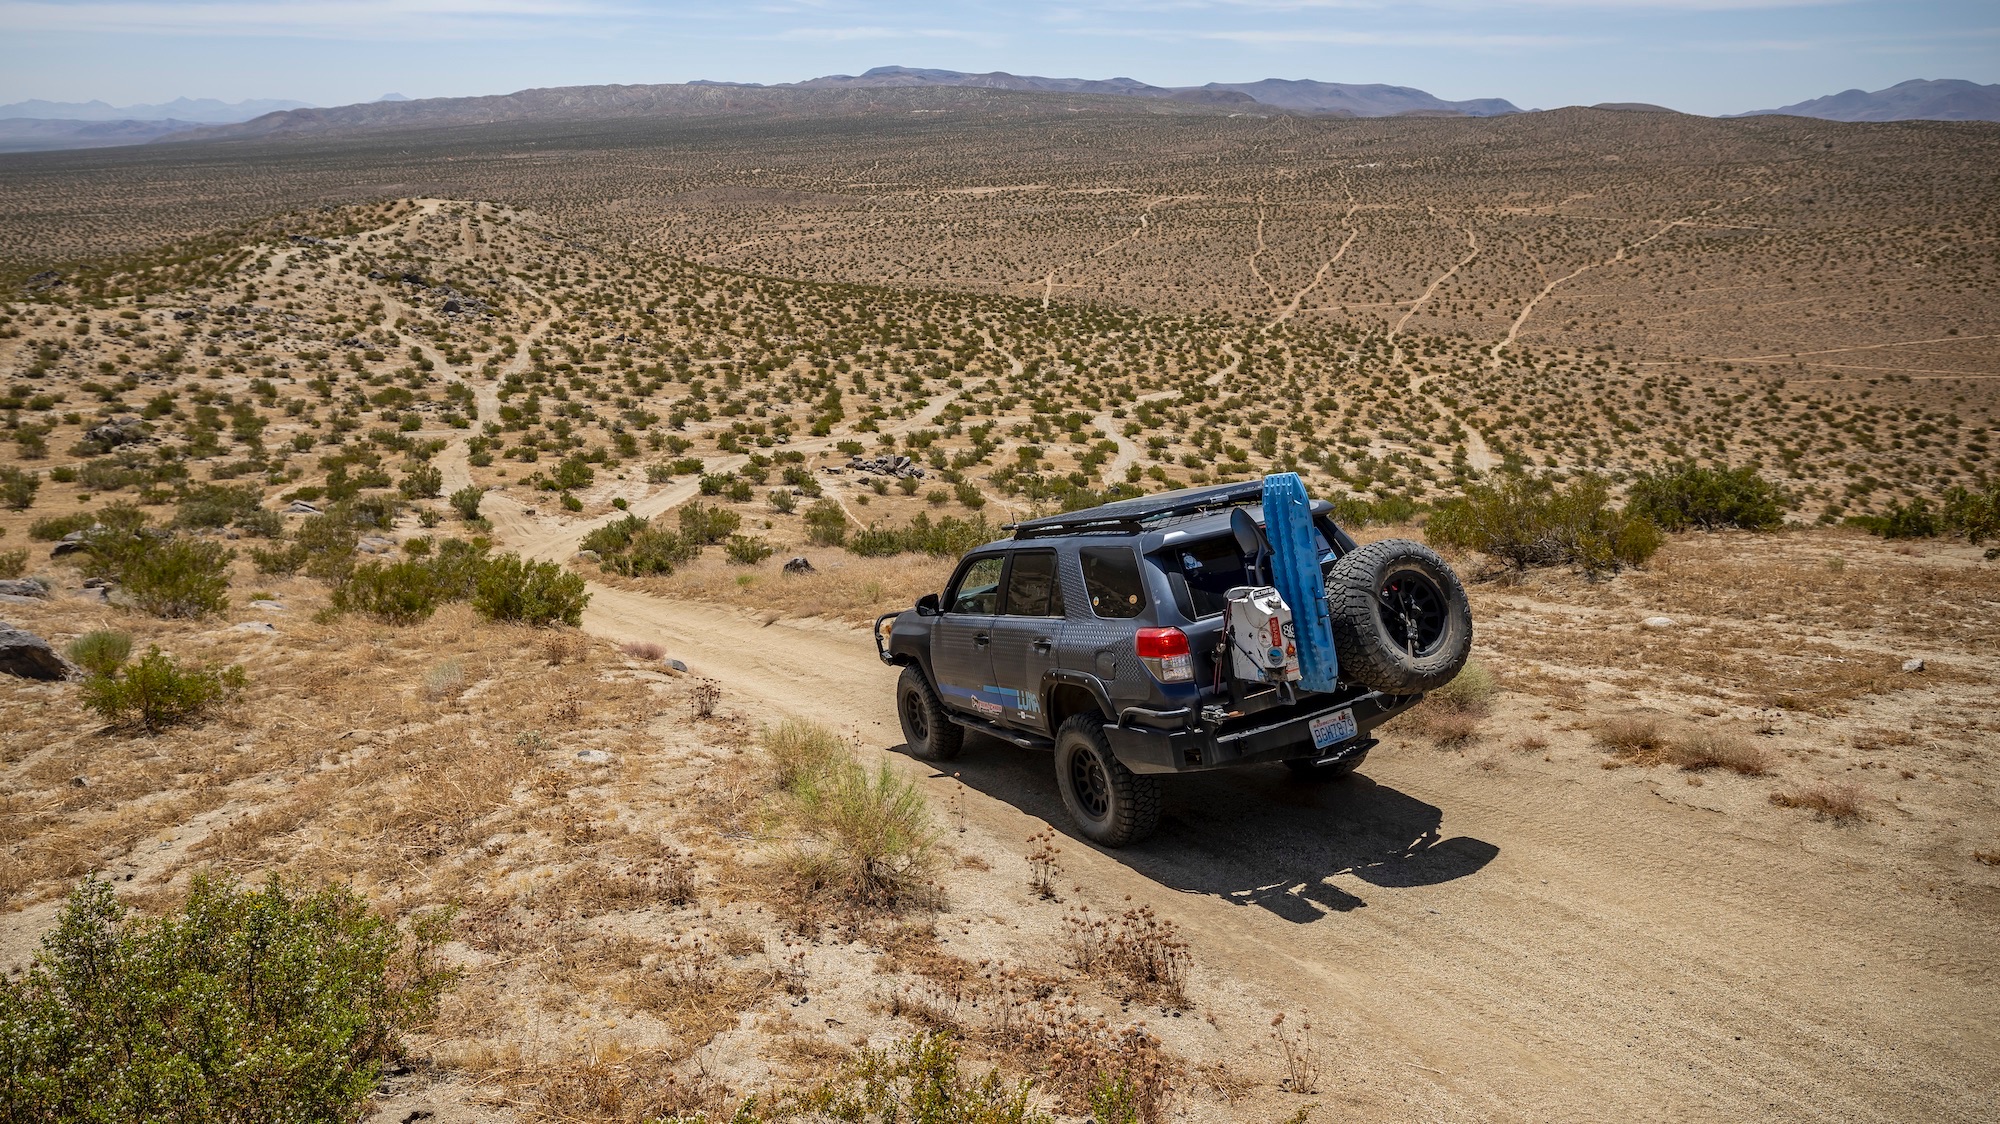 Paper maps aren't dead, but this digital mapping app is an innovation for off-road explorers